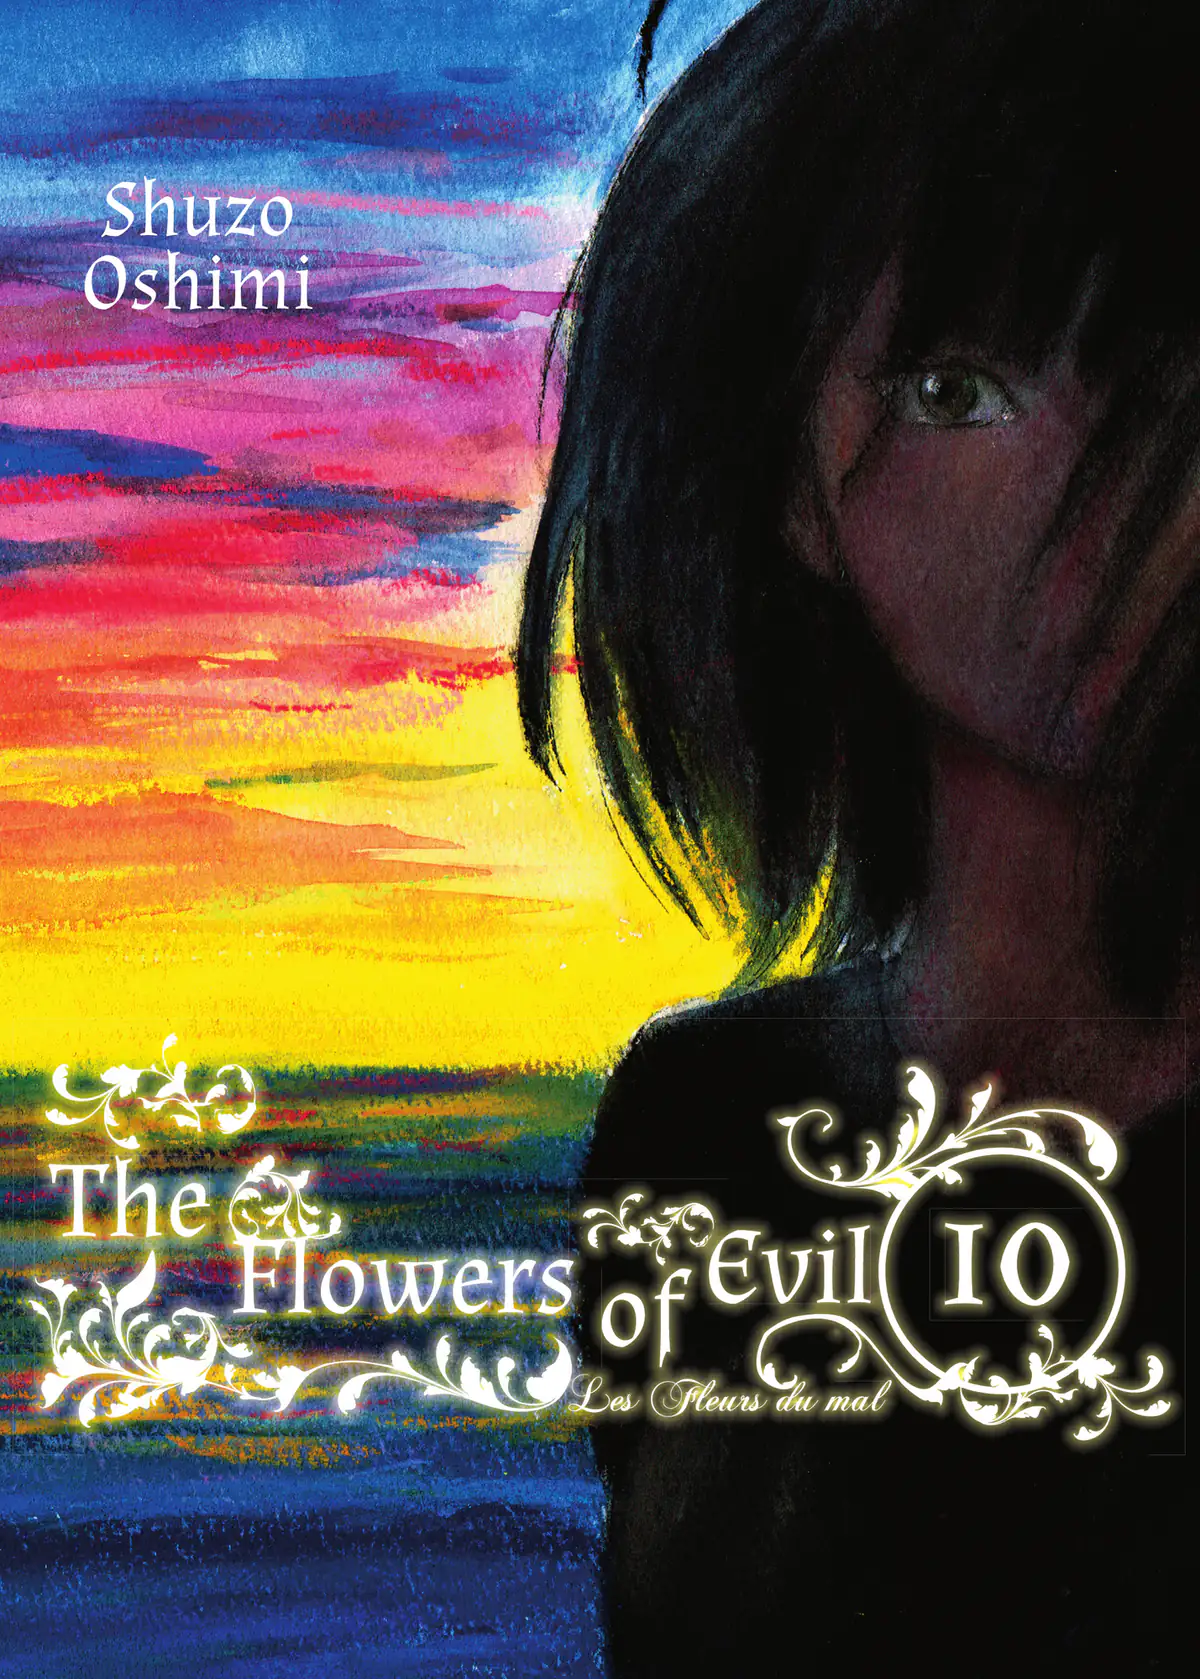 The Flowers of Evil, Chapter 6 - The Flowers of Evil Manga Online